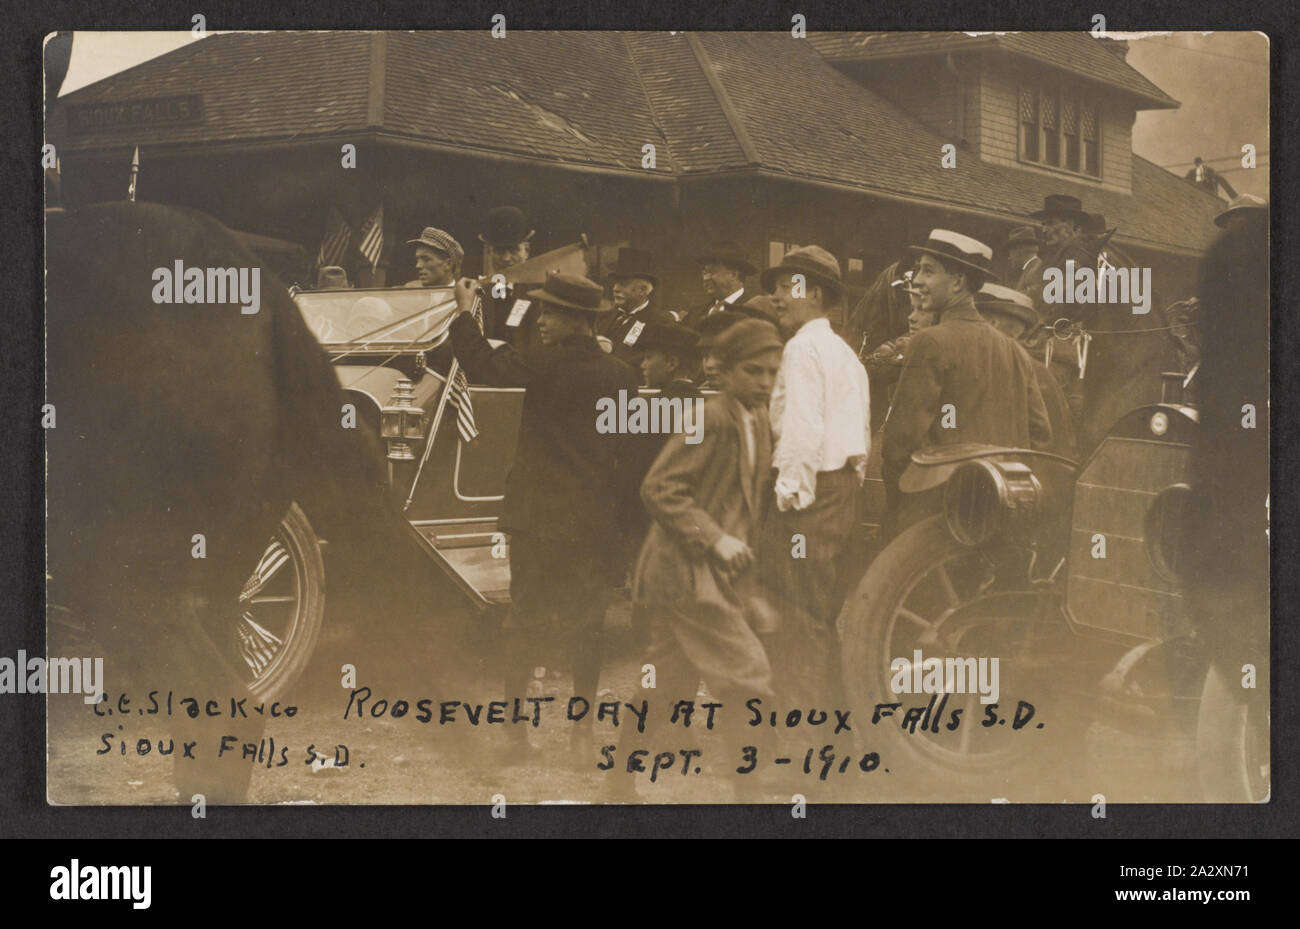 Roosevelt Tag in Sioux Falls S.D., Sept. 3 - 1910 Stockfoto